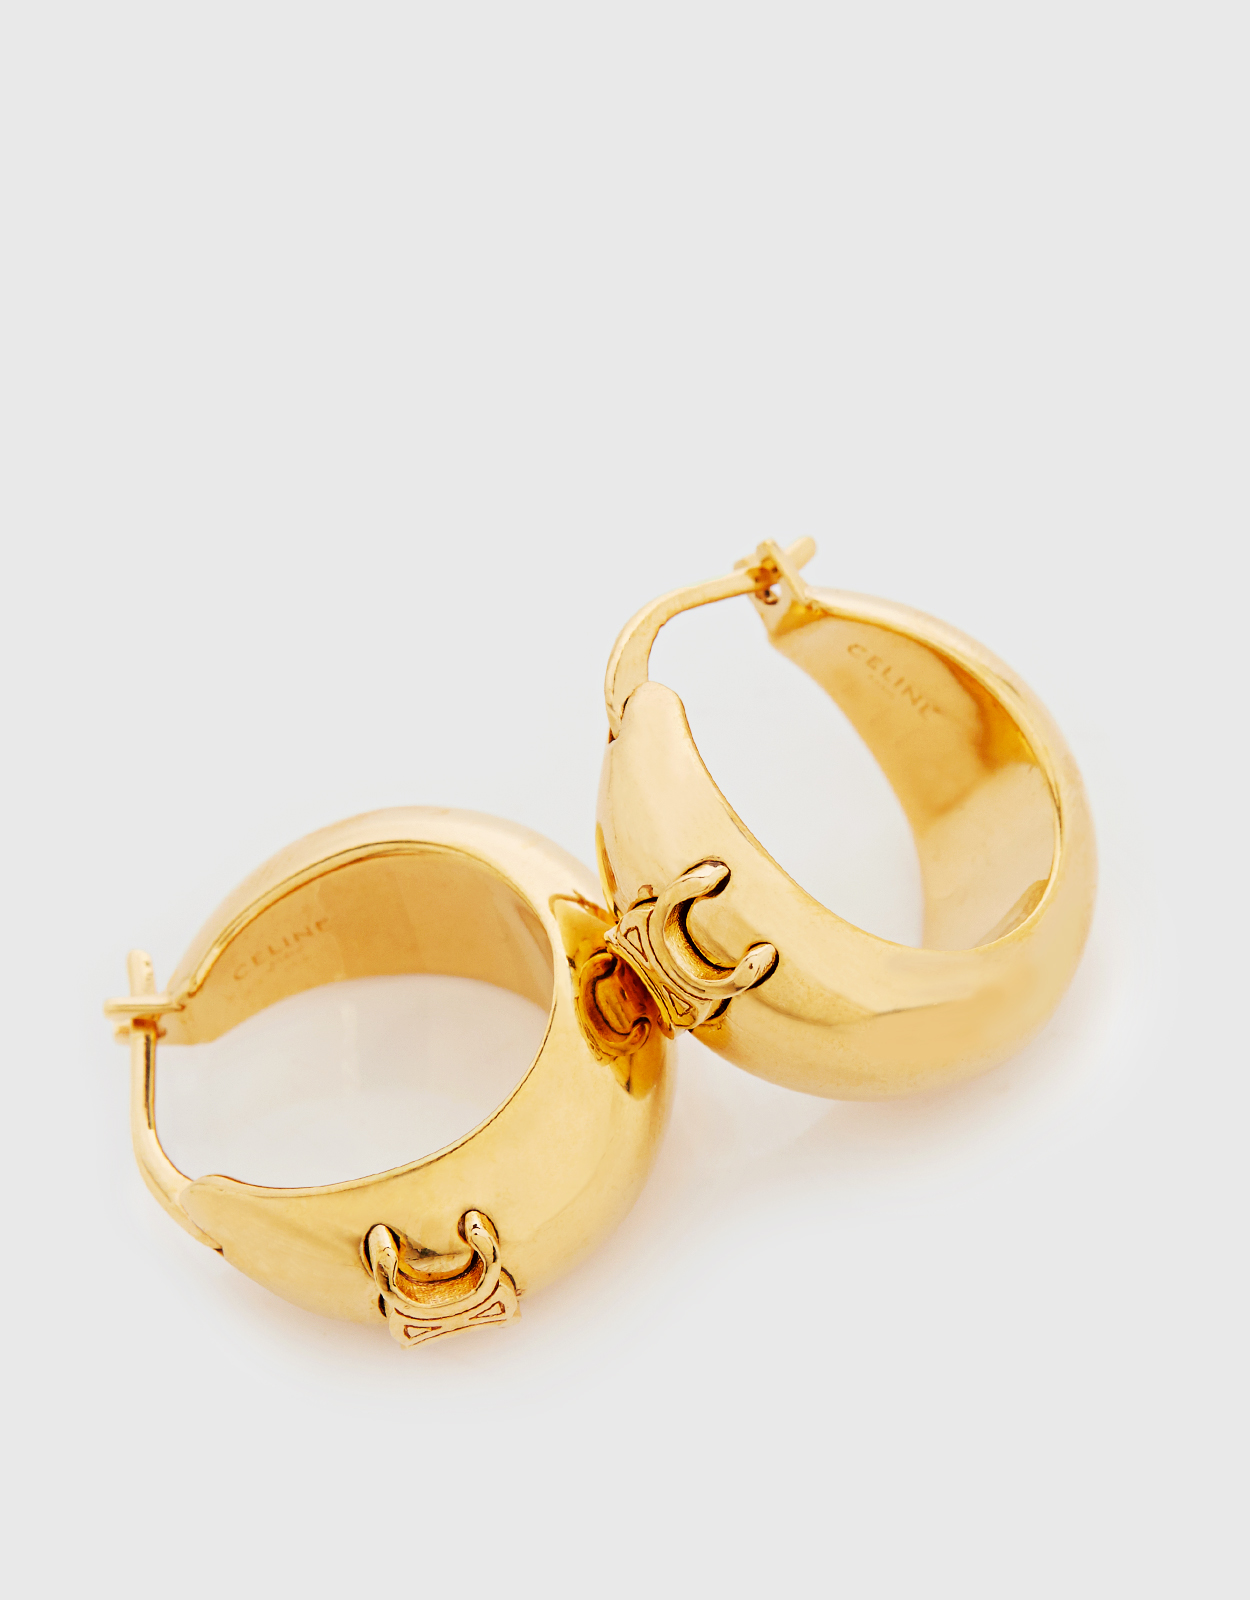 Celine Triomphe Large Brass Earrings (Fashion Jewelry and Watches,Earrings)